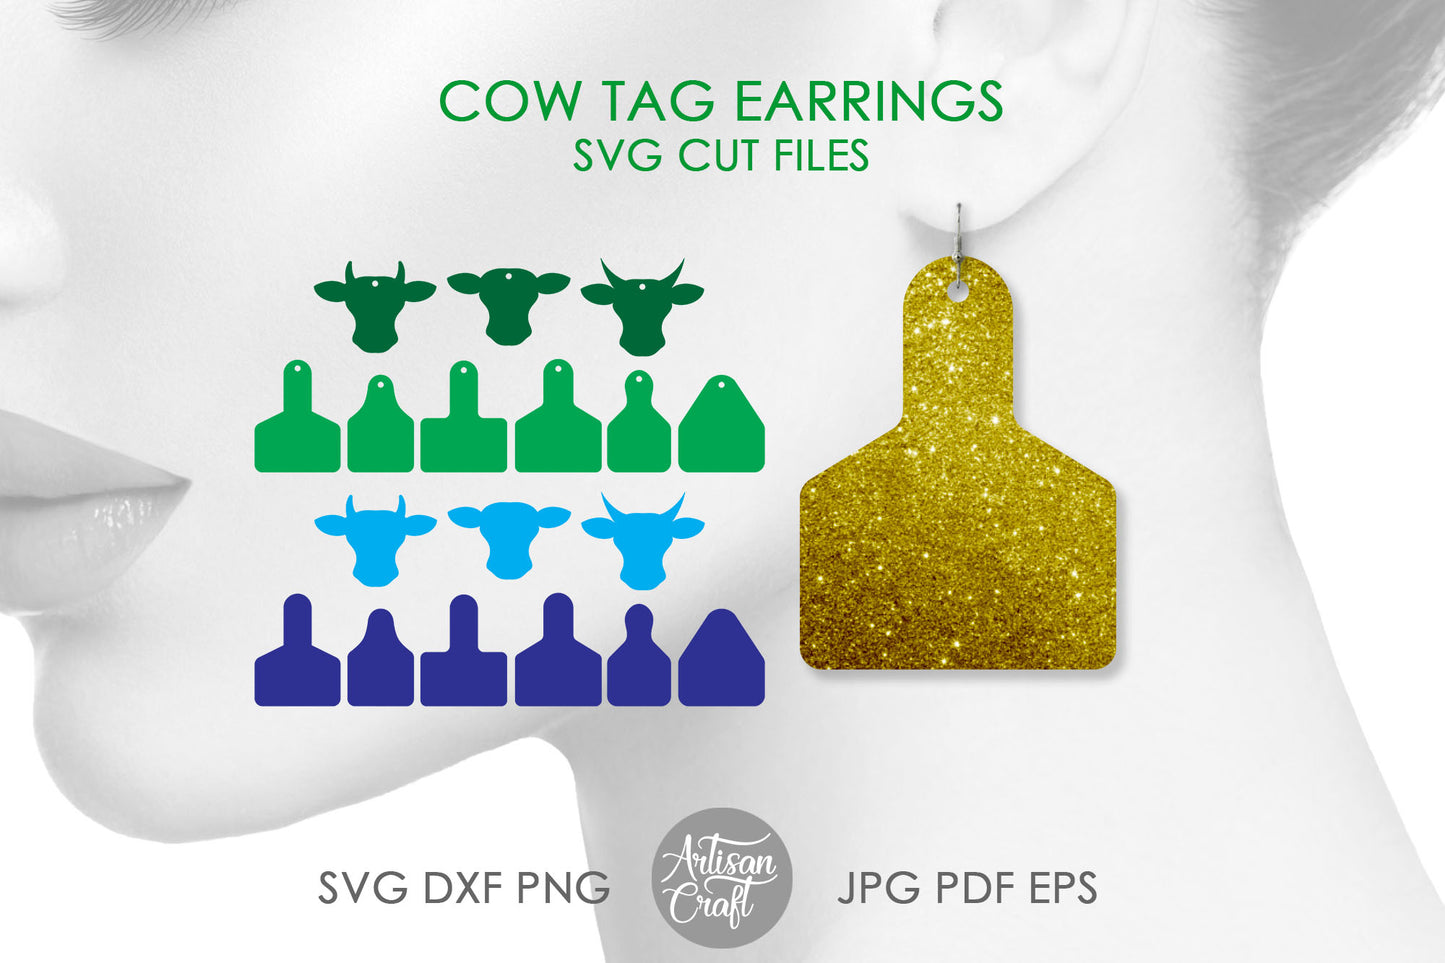 Cow tag earrings SVG